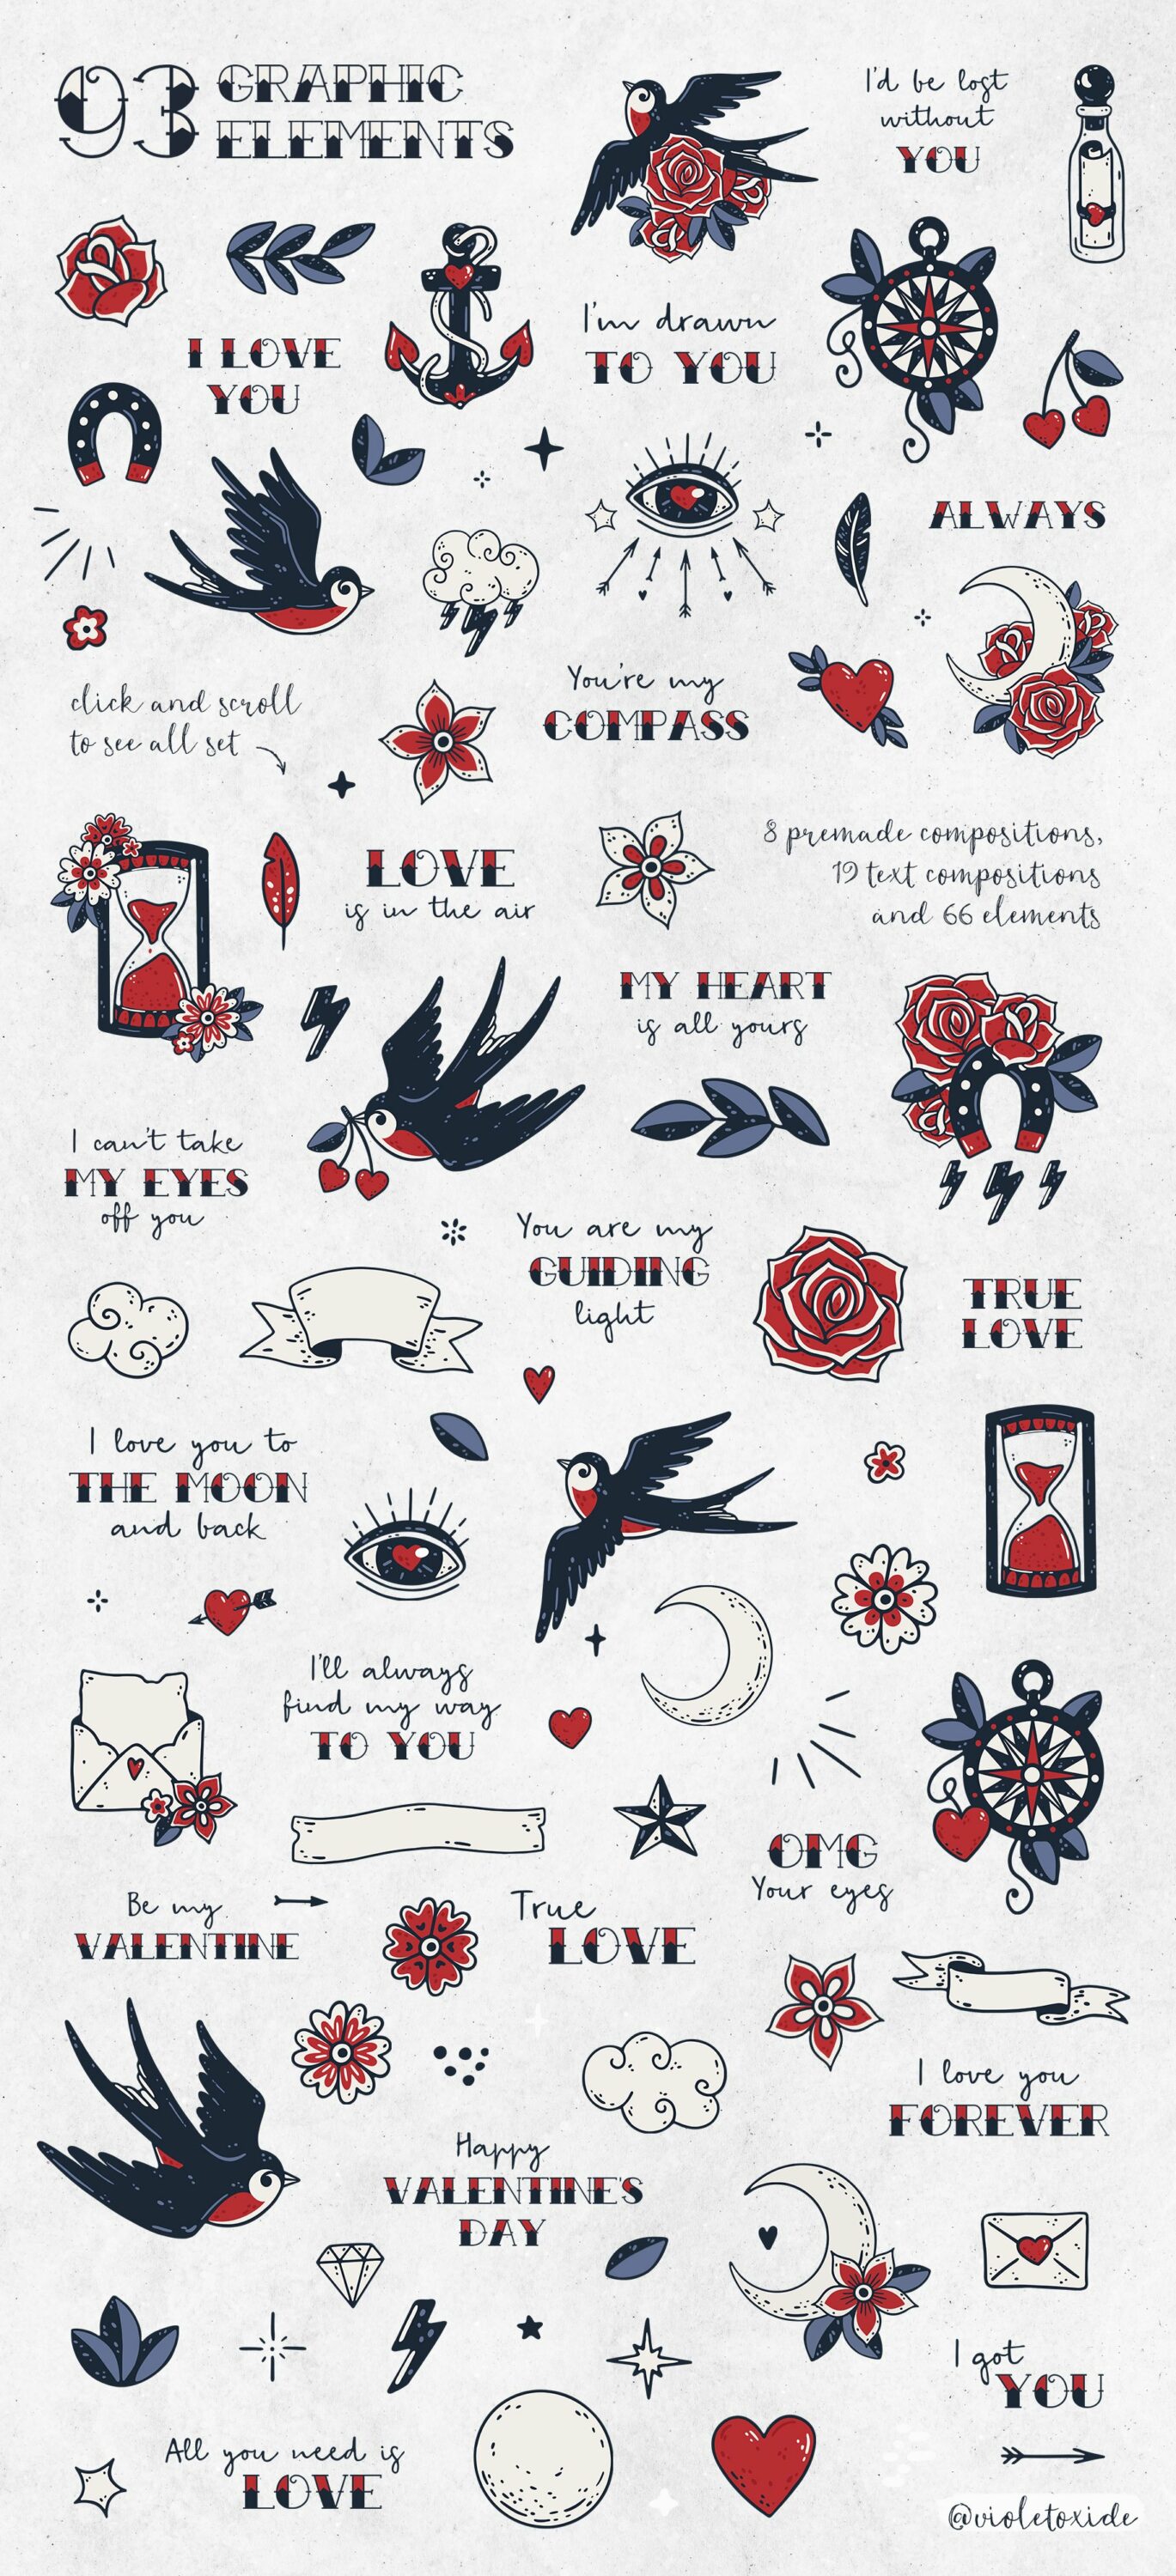 Dark graphic elements for your love story.